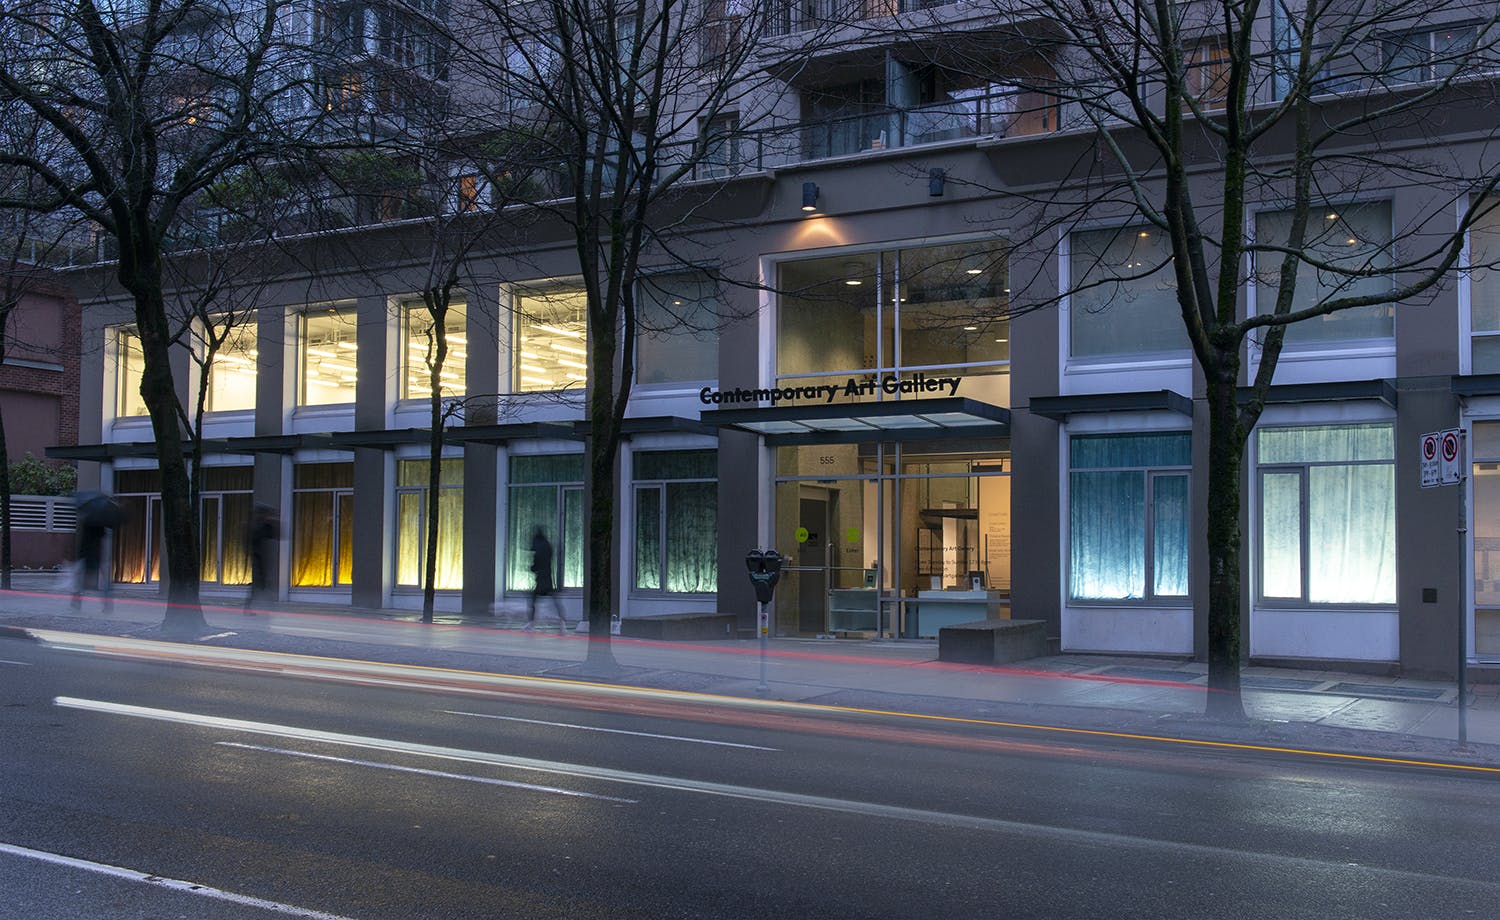 Exterior image of the Contemporary Art Gallery displaying the work of Nicole Kelly Westman in the windows. The eight windows on the first floor are lit, highlighting various coloured backdrops.